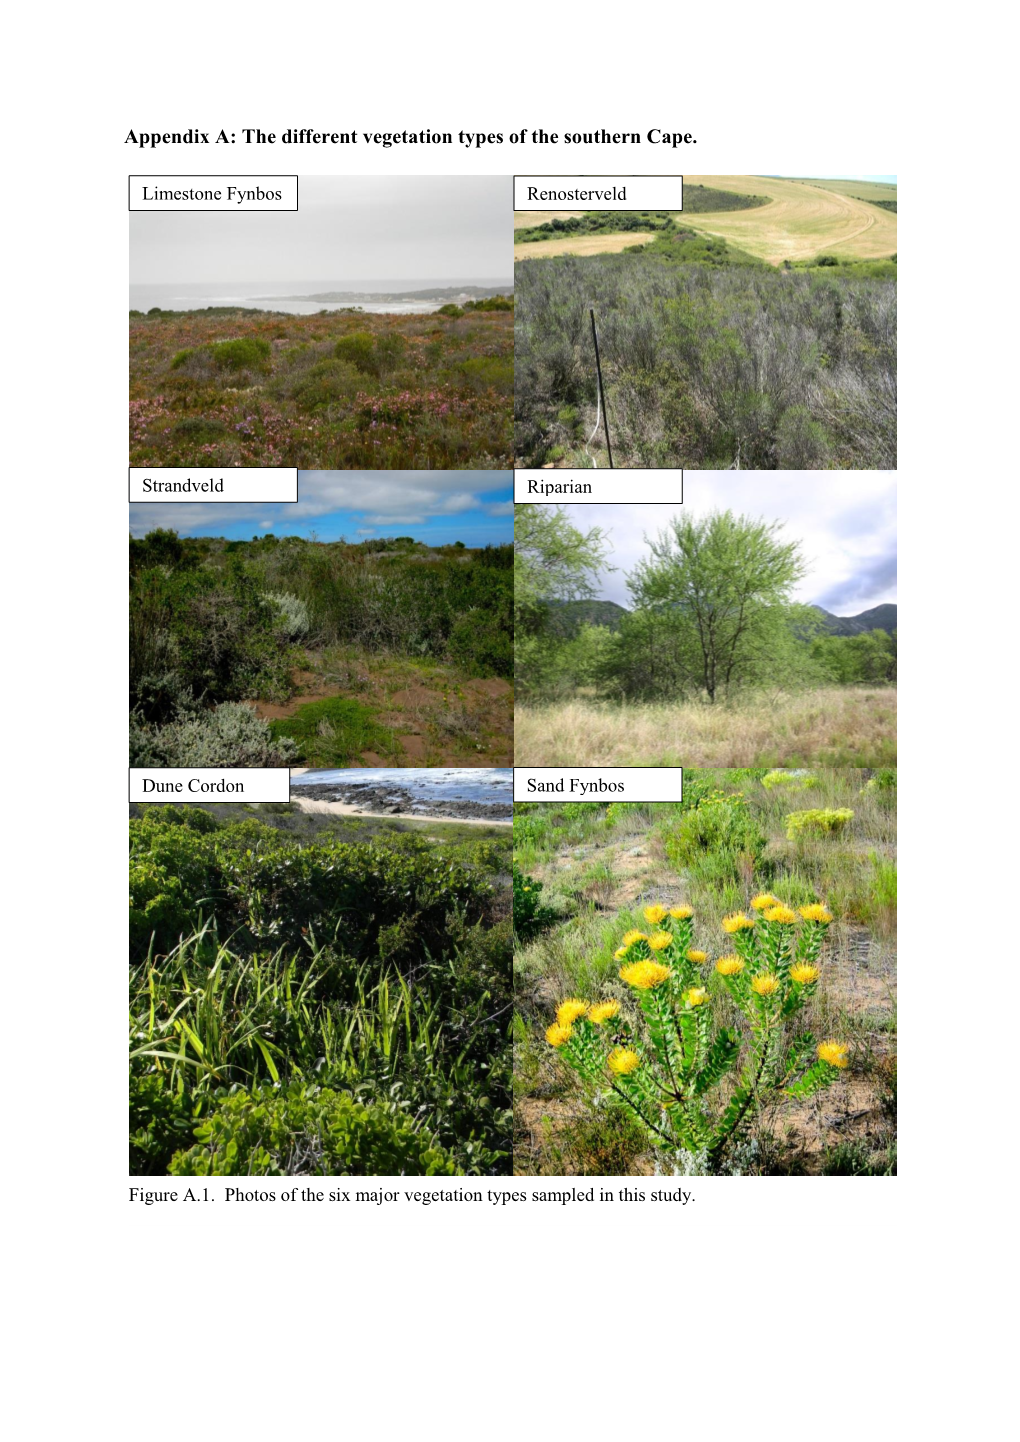 The Different Vegetation Types of the Southern Cape